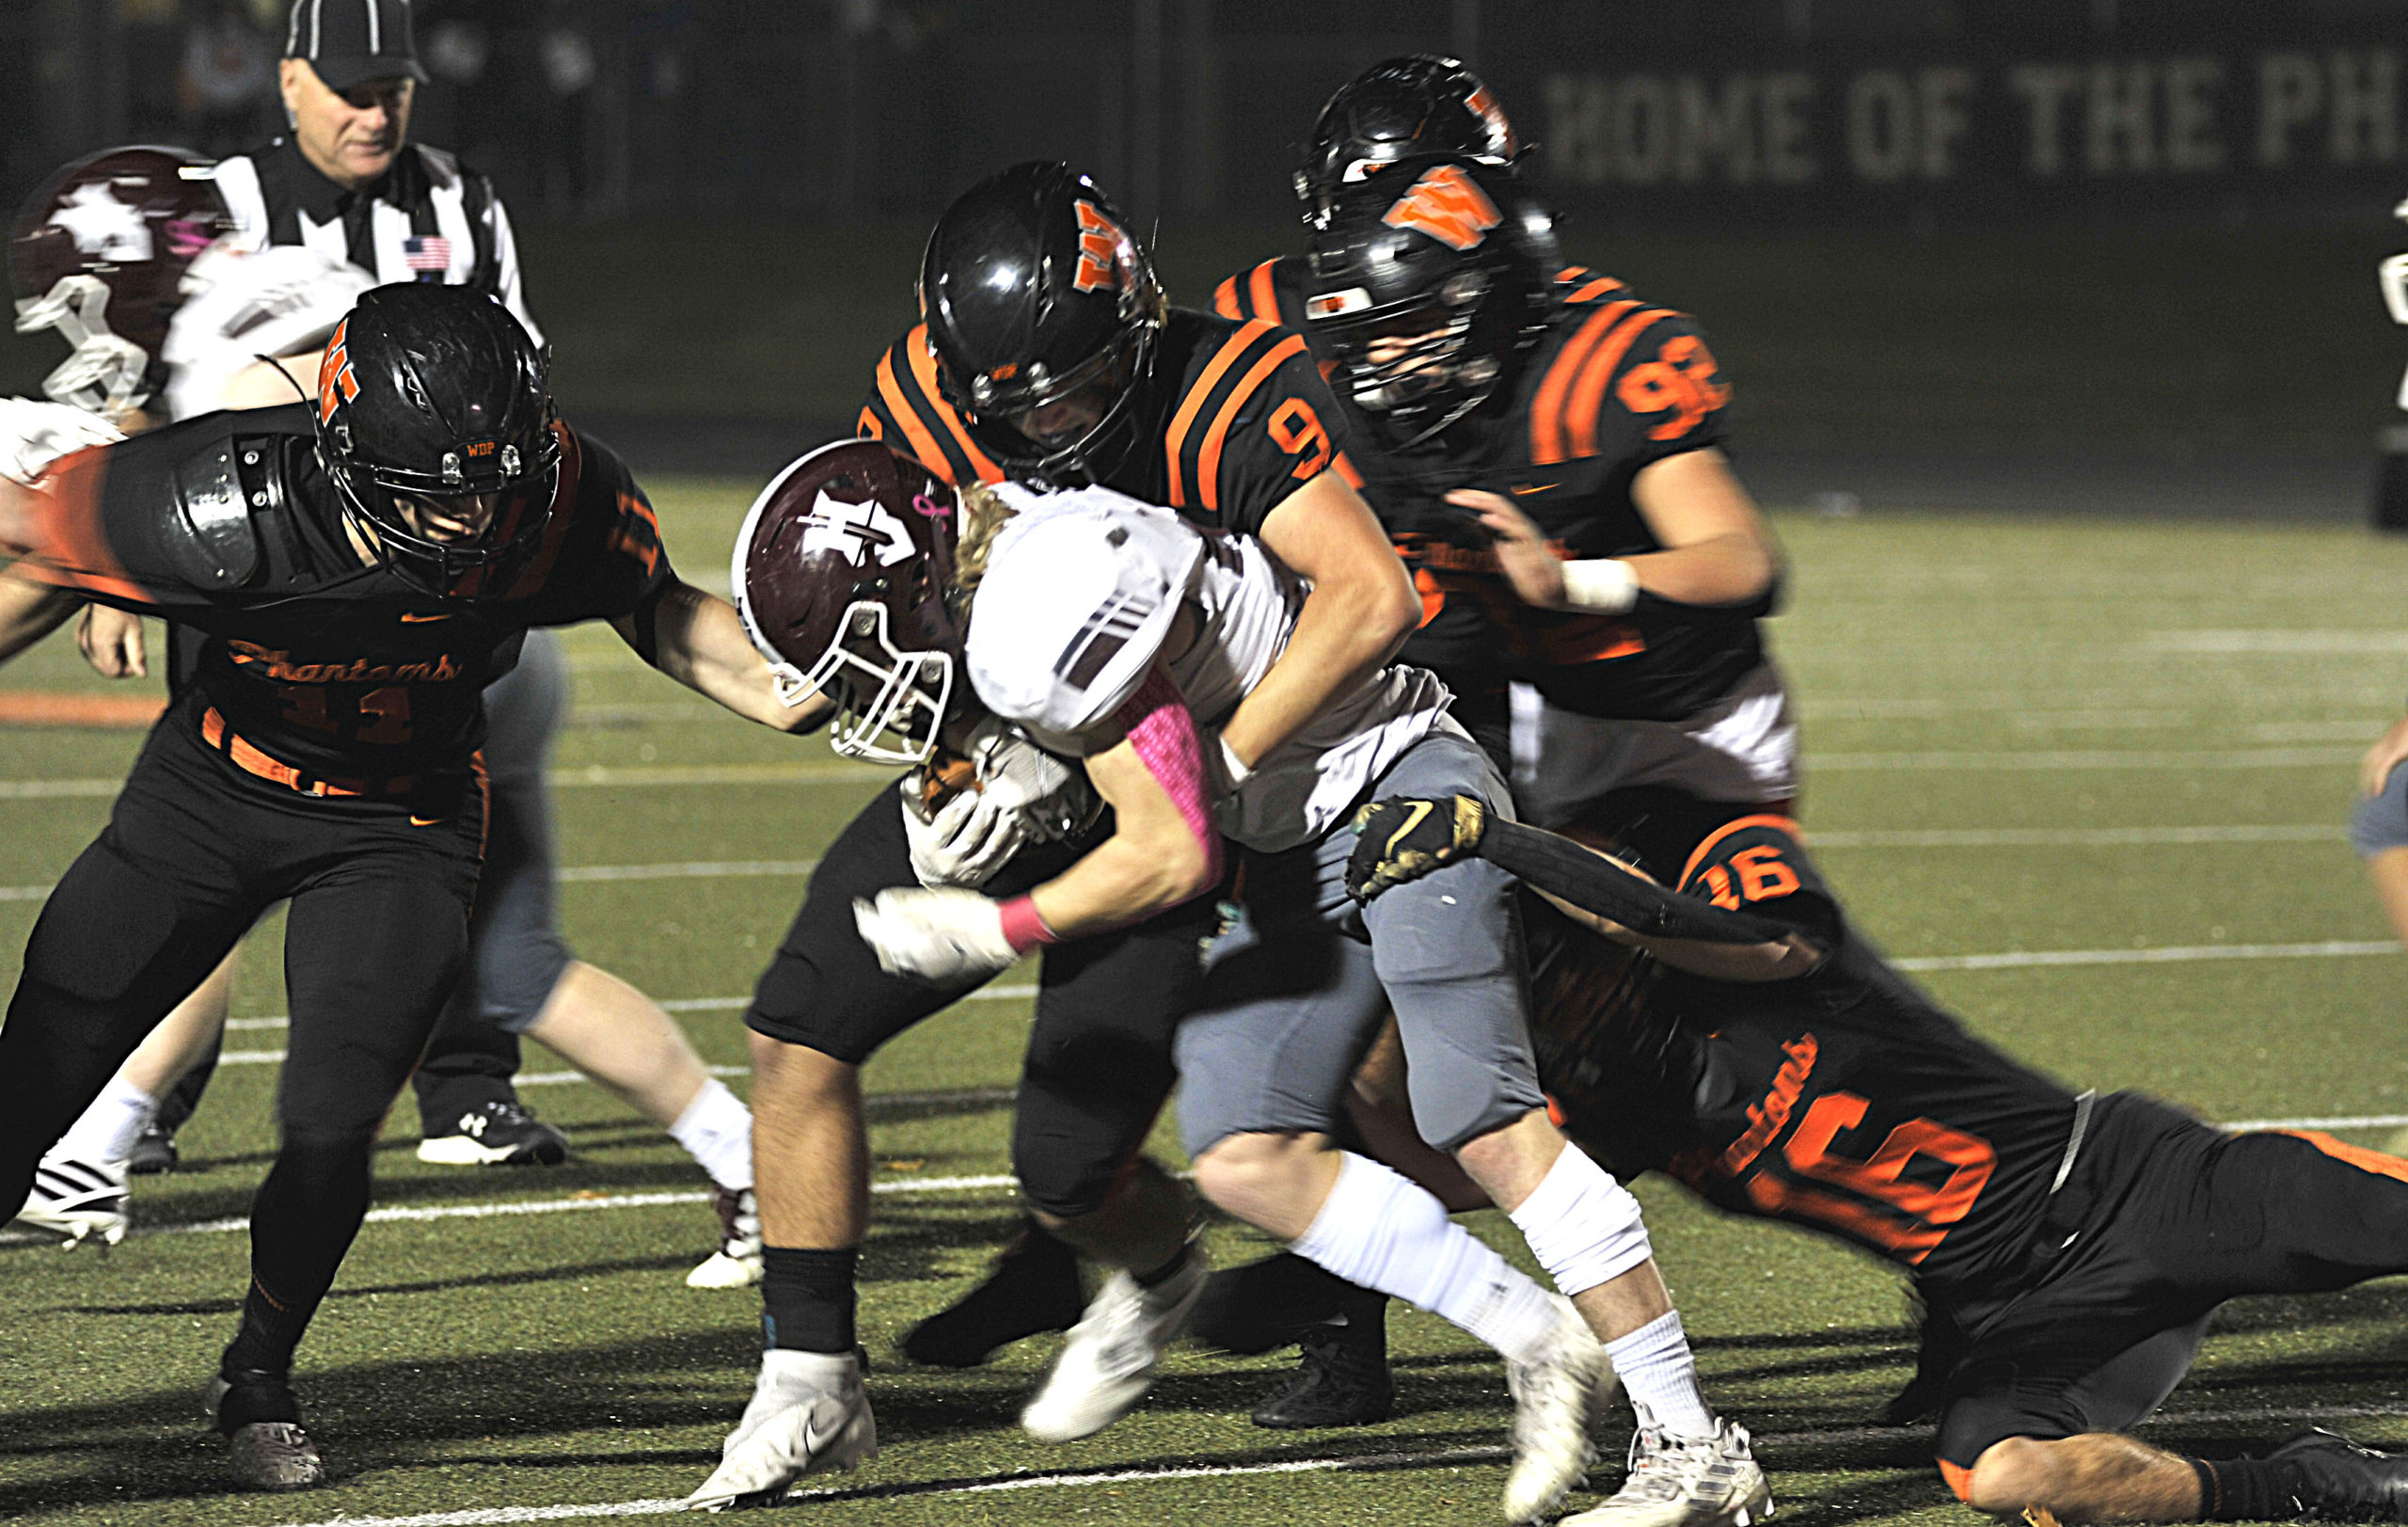 West De Pere pounds Holmen in playoff opener